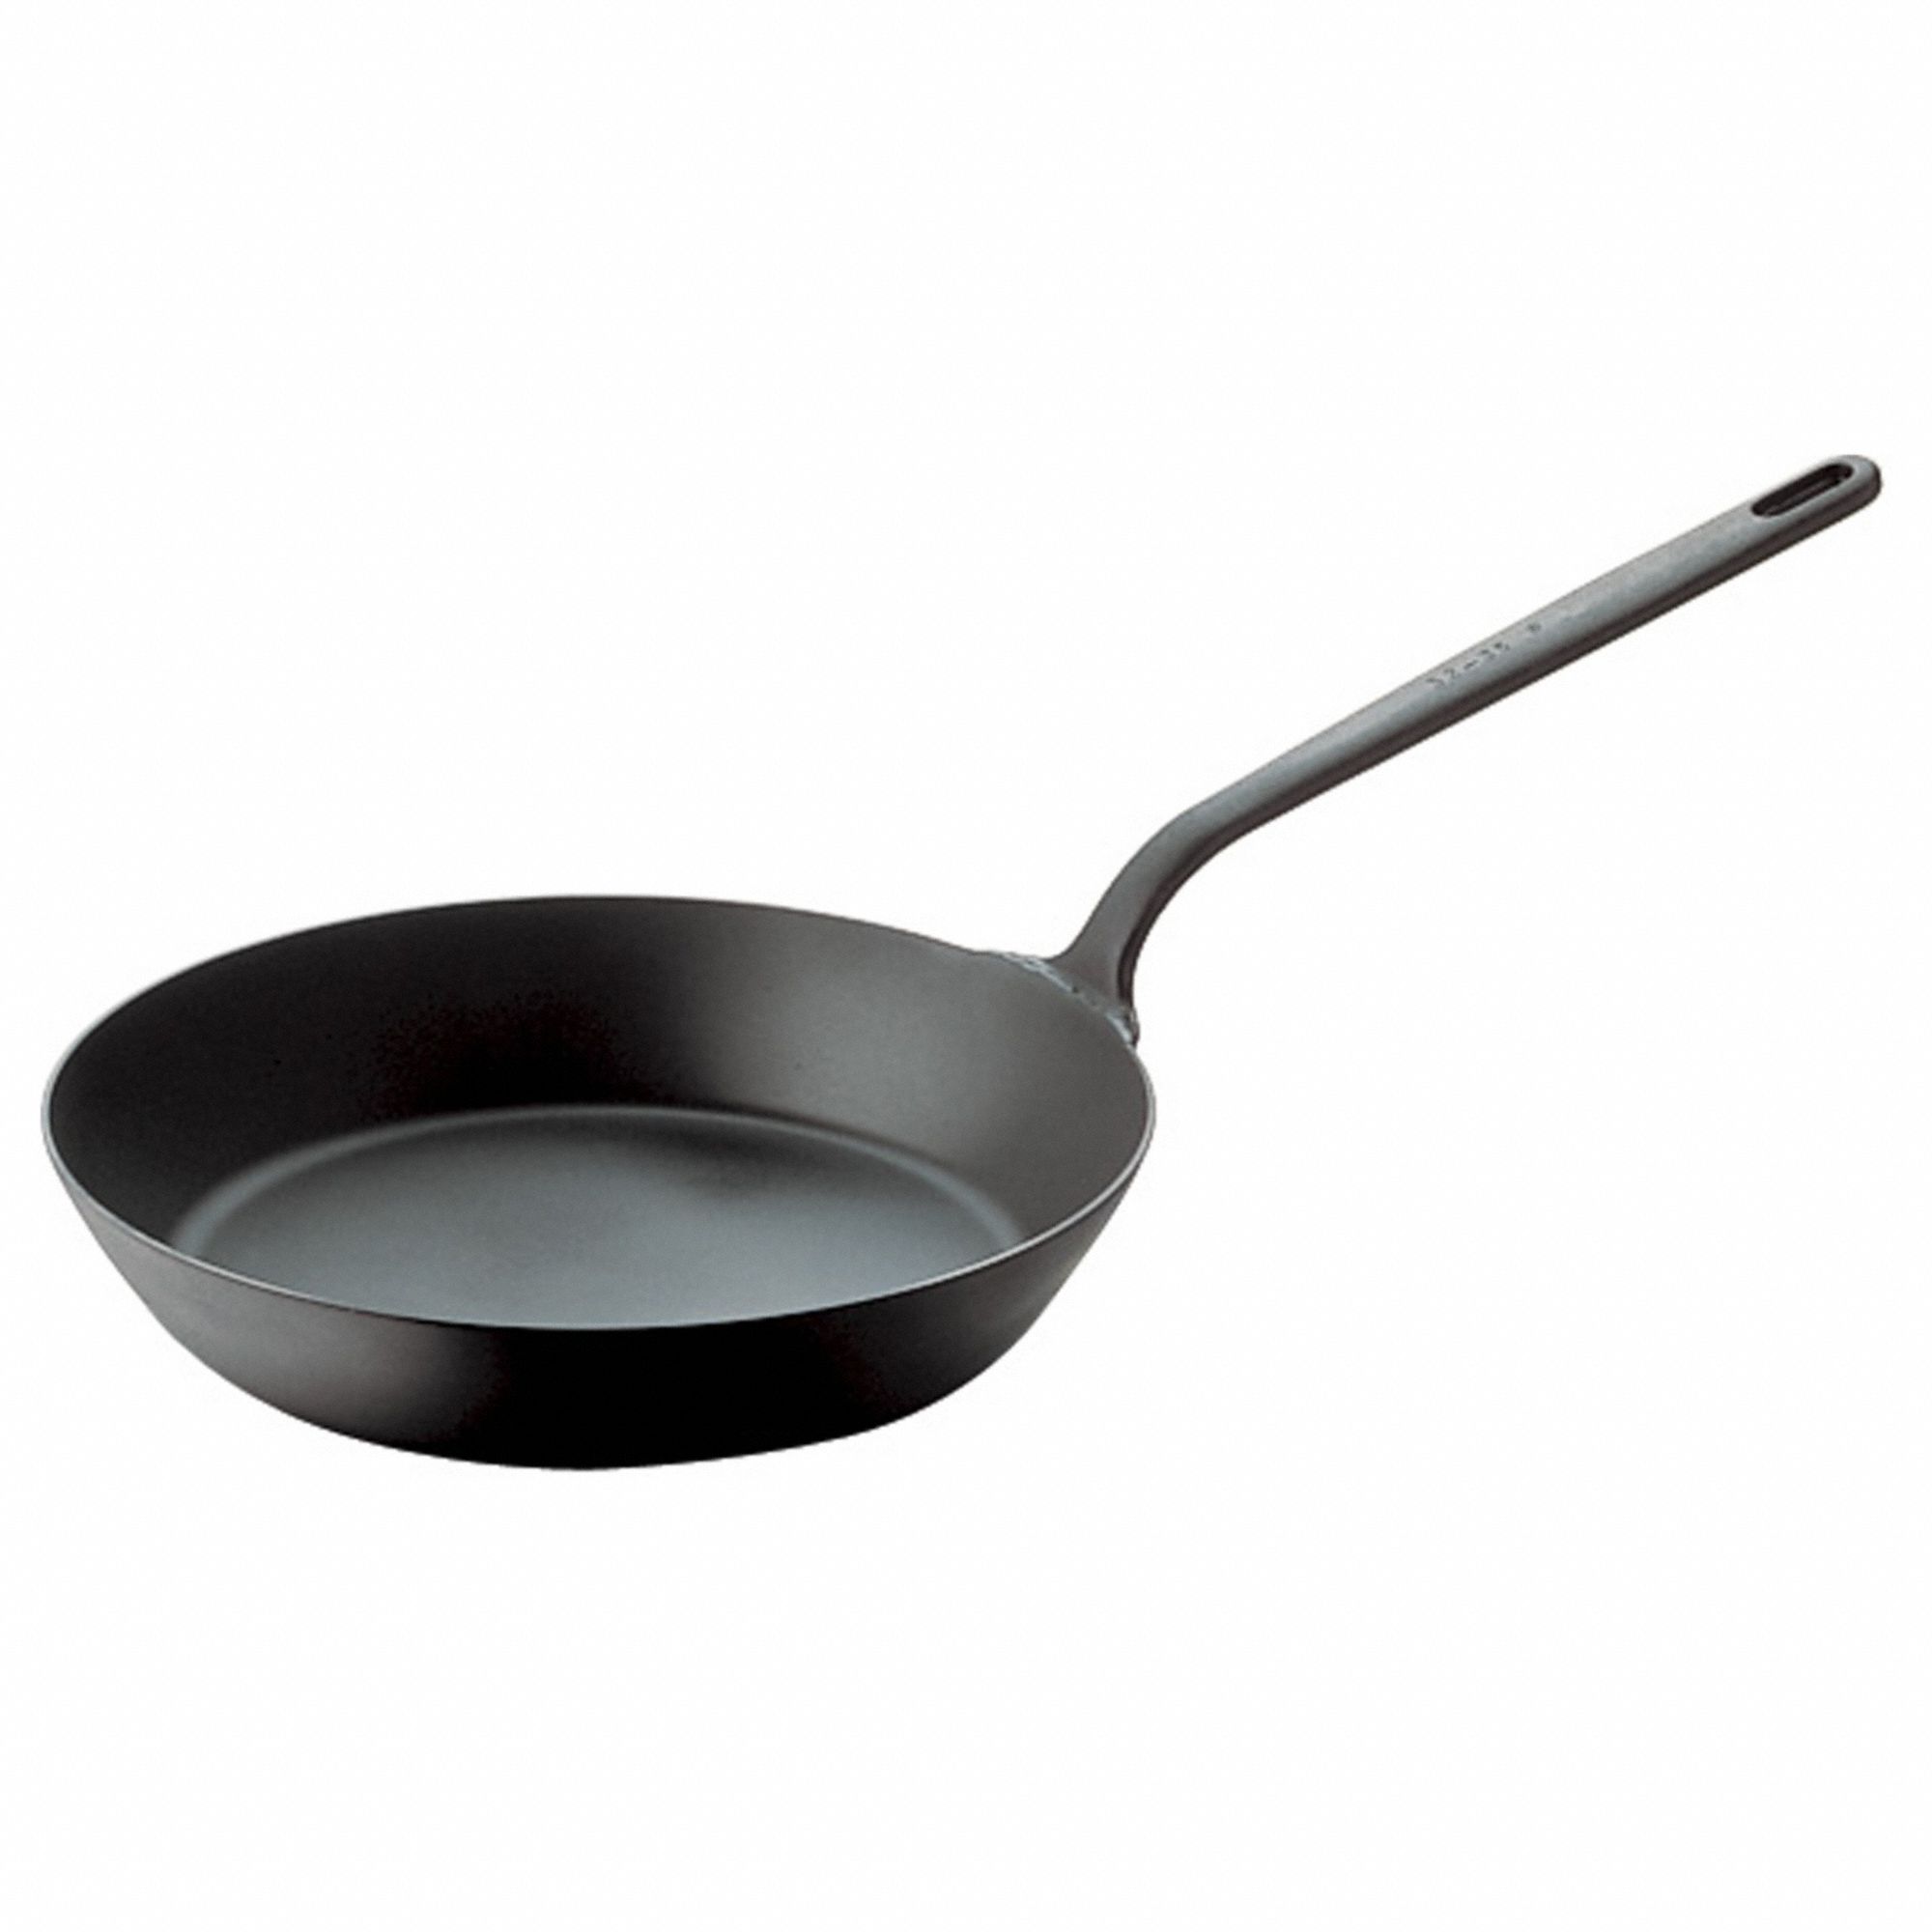 Fry Pan: 1 qt Capacity, 14 in Overall Lg, 7 7/8 in Overall Wd, 1 1/2 in Overall Ht